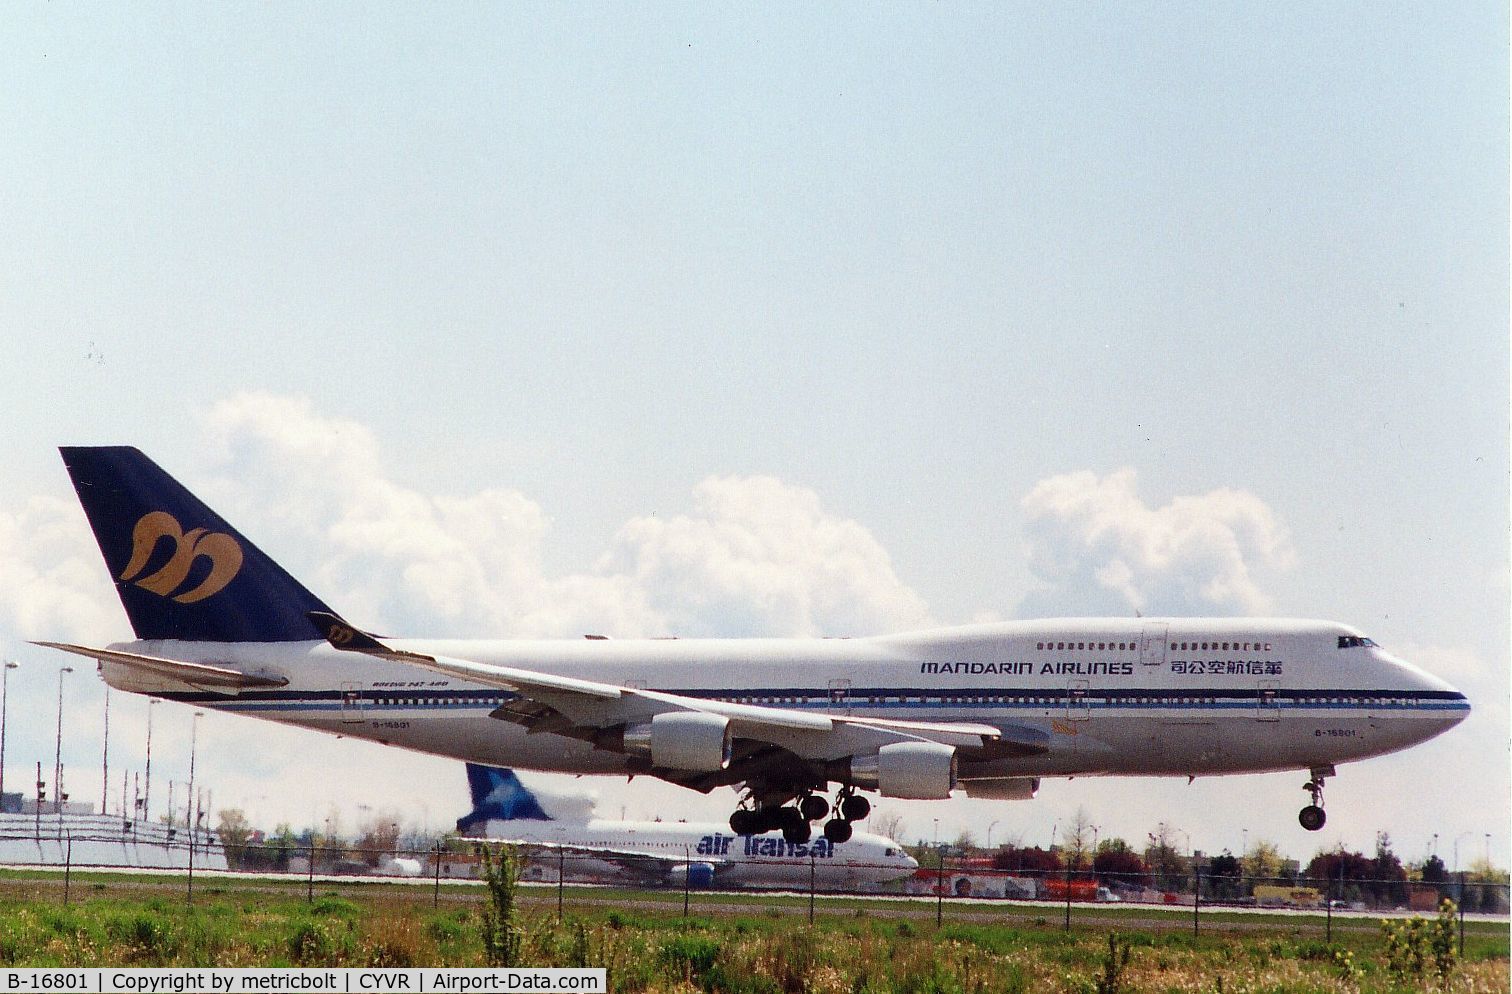 B-16801, 1995 Boeing 747-406 C/N 27965, Arrving in Vancouver from Taipei,late 1990s.